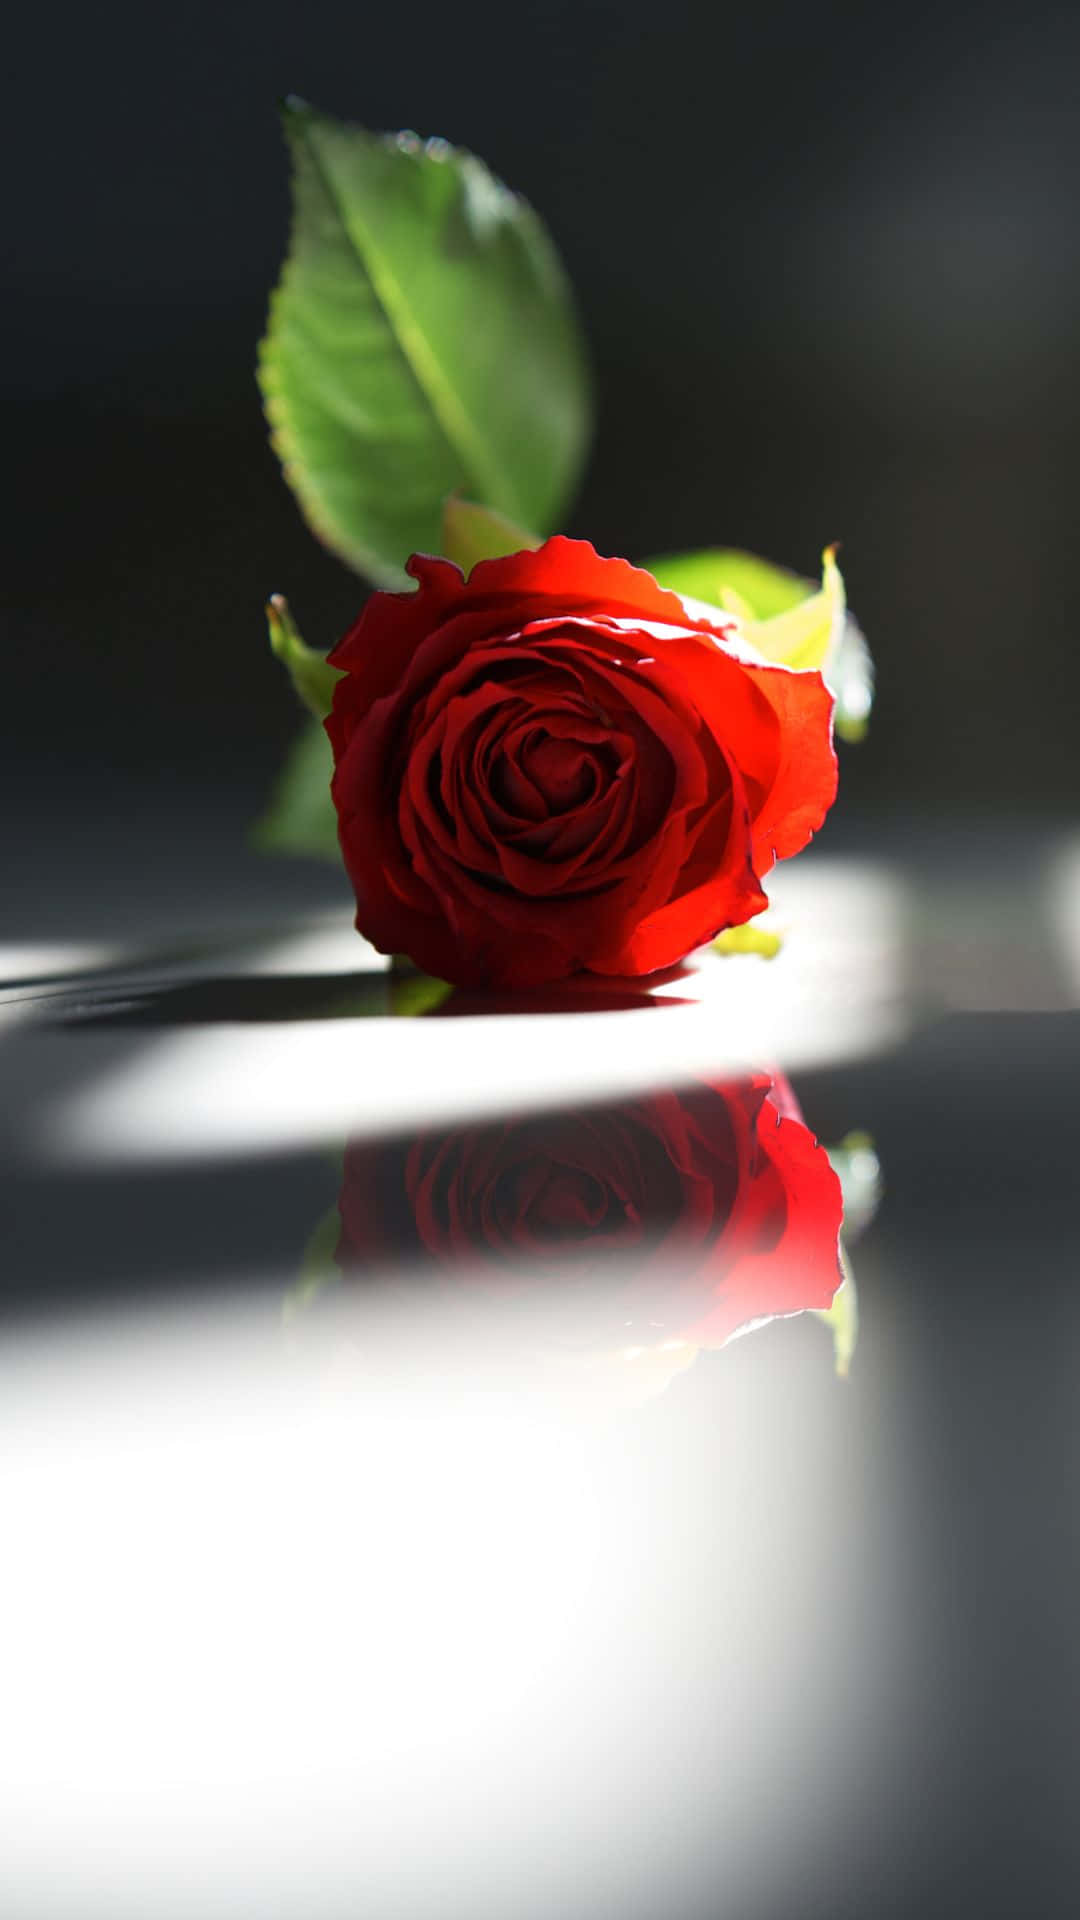 A Red Rose On A White Surface Background